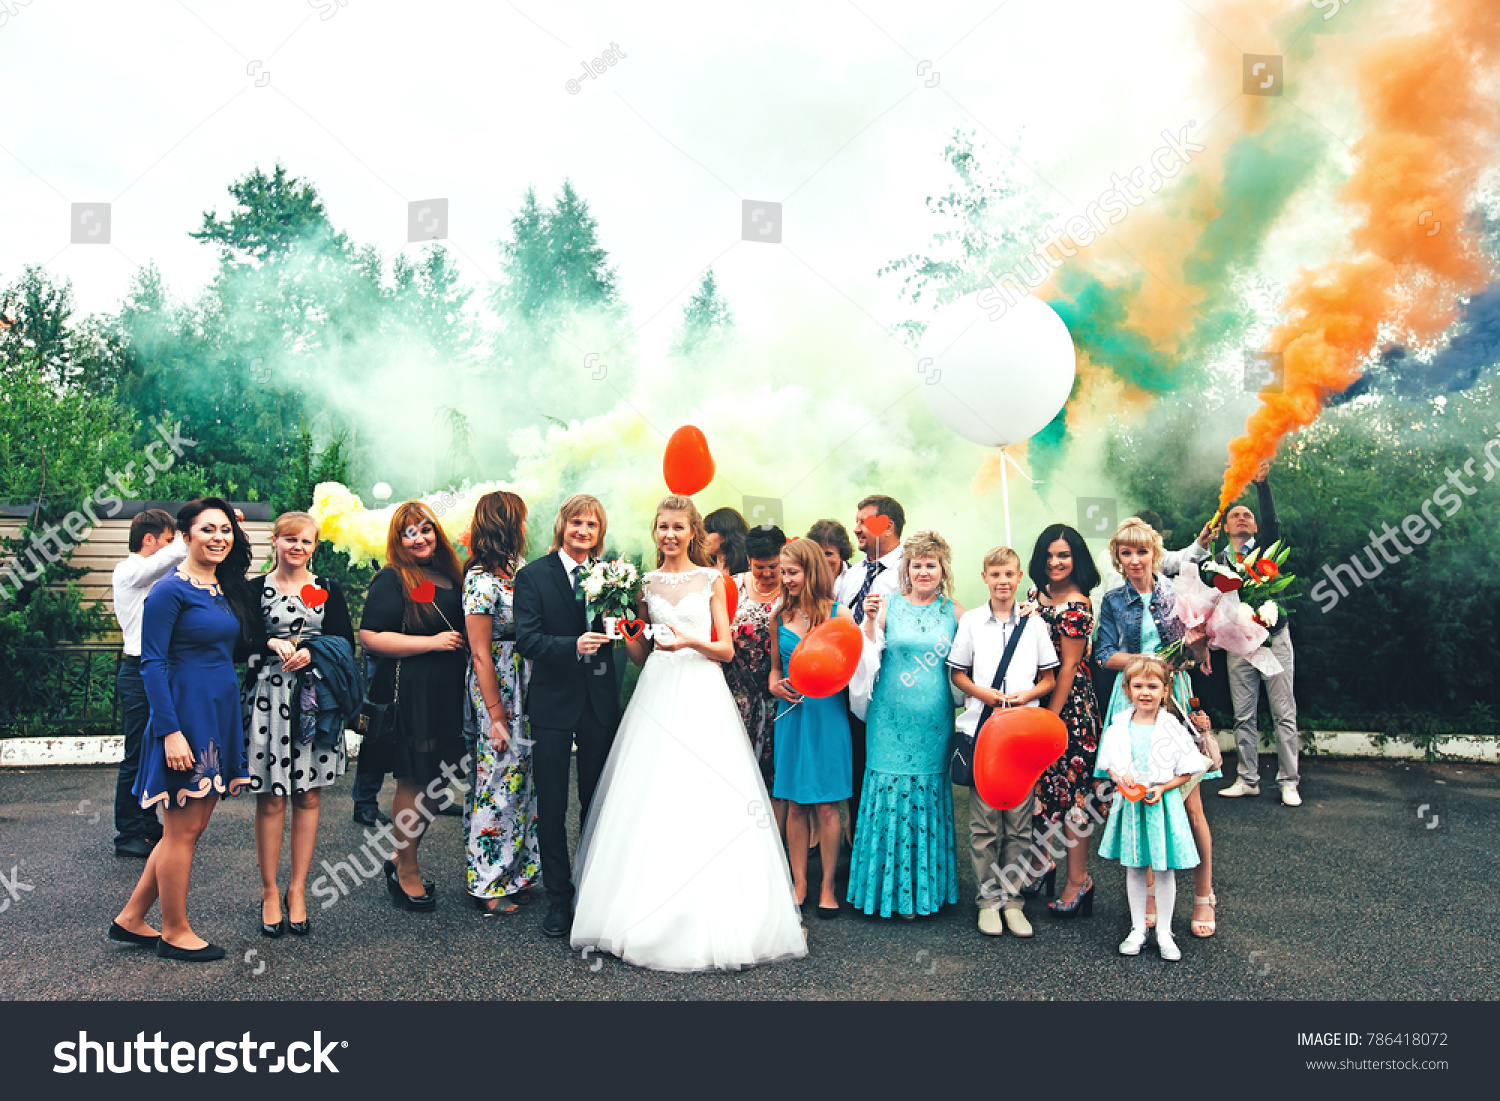 ST PETERSBURG, RUSSIA - JULY 15, 2017: Wedding Event. Wedding Couple Bride and Groom with Friends and Relatives in the Wedding Palace during the Wedding Ceremony #786418072